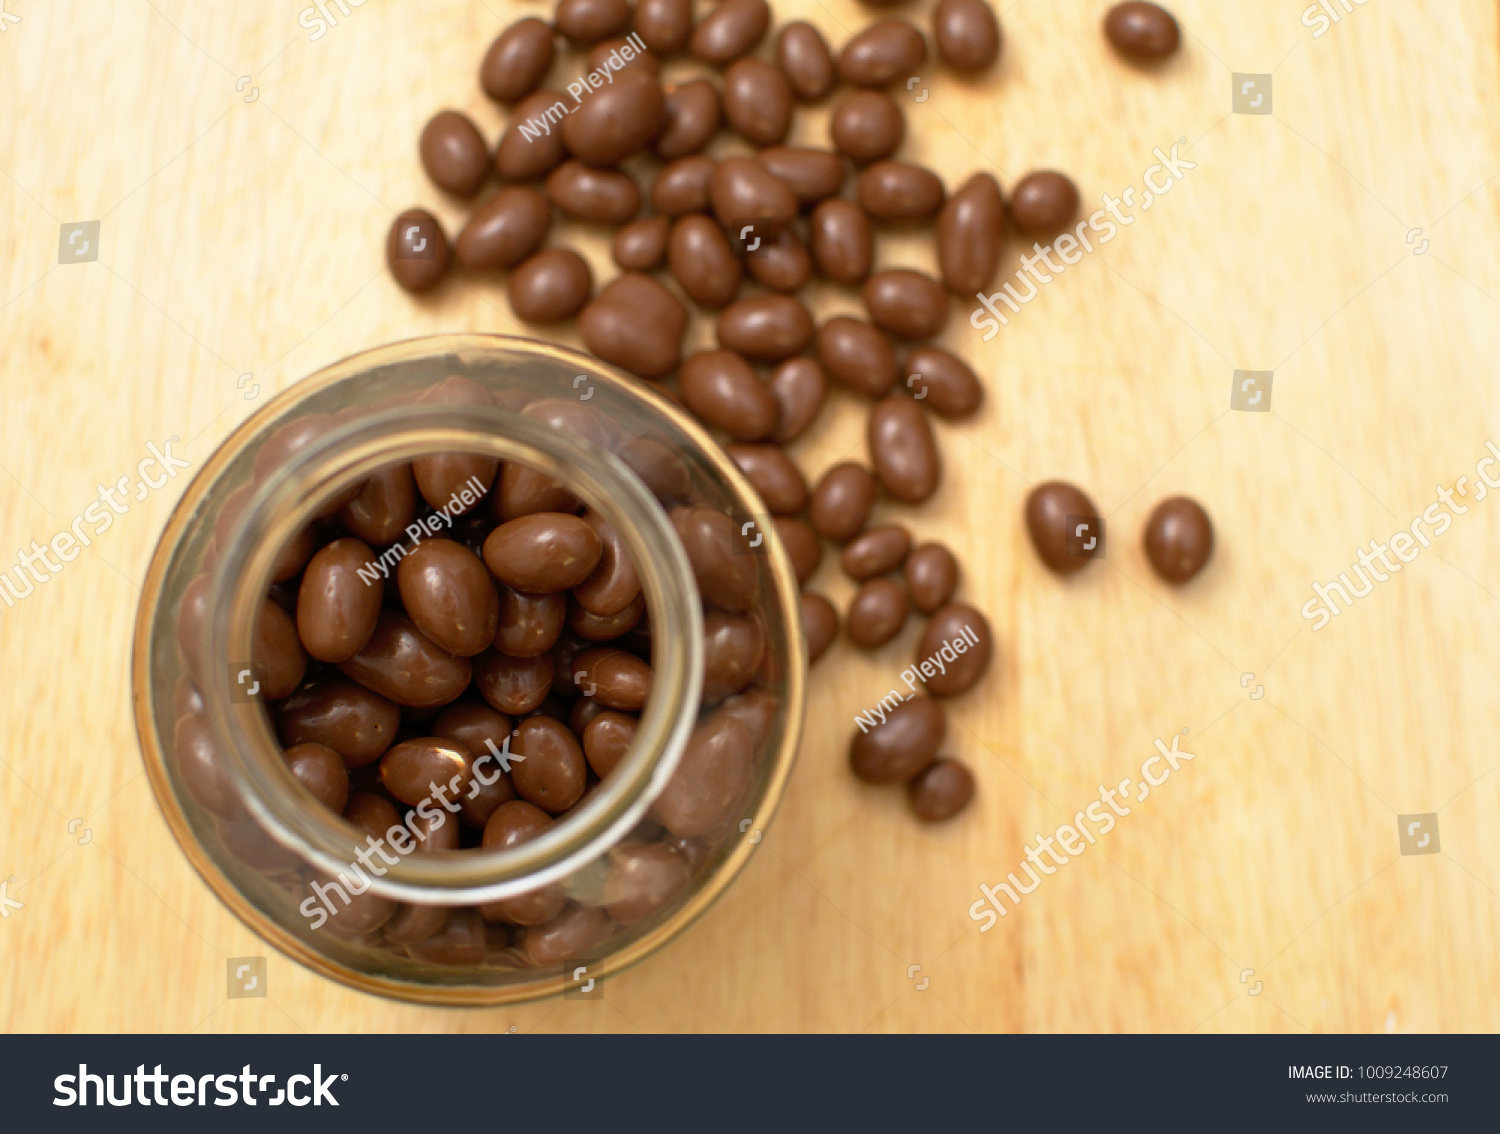 Download Chocolate Peanuts Coated Clear Glass Jar Stock Photo Edit Now 1009248607 Yellowimages Mockups